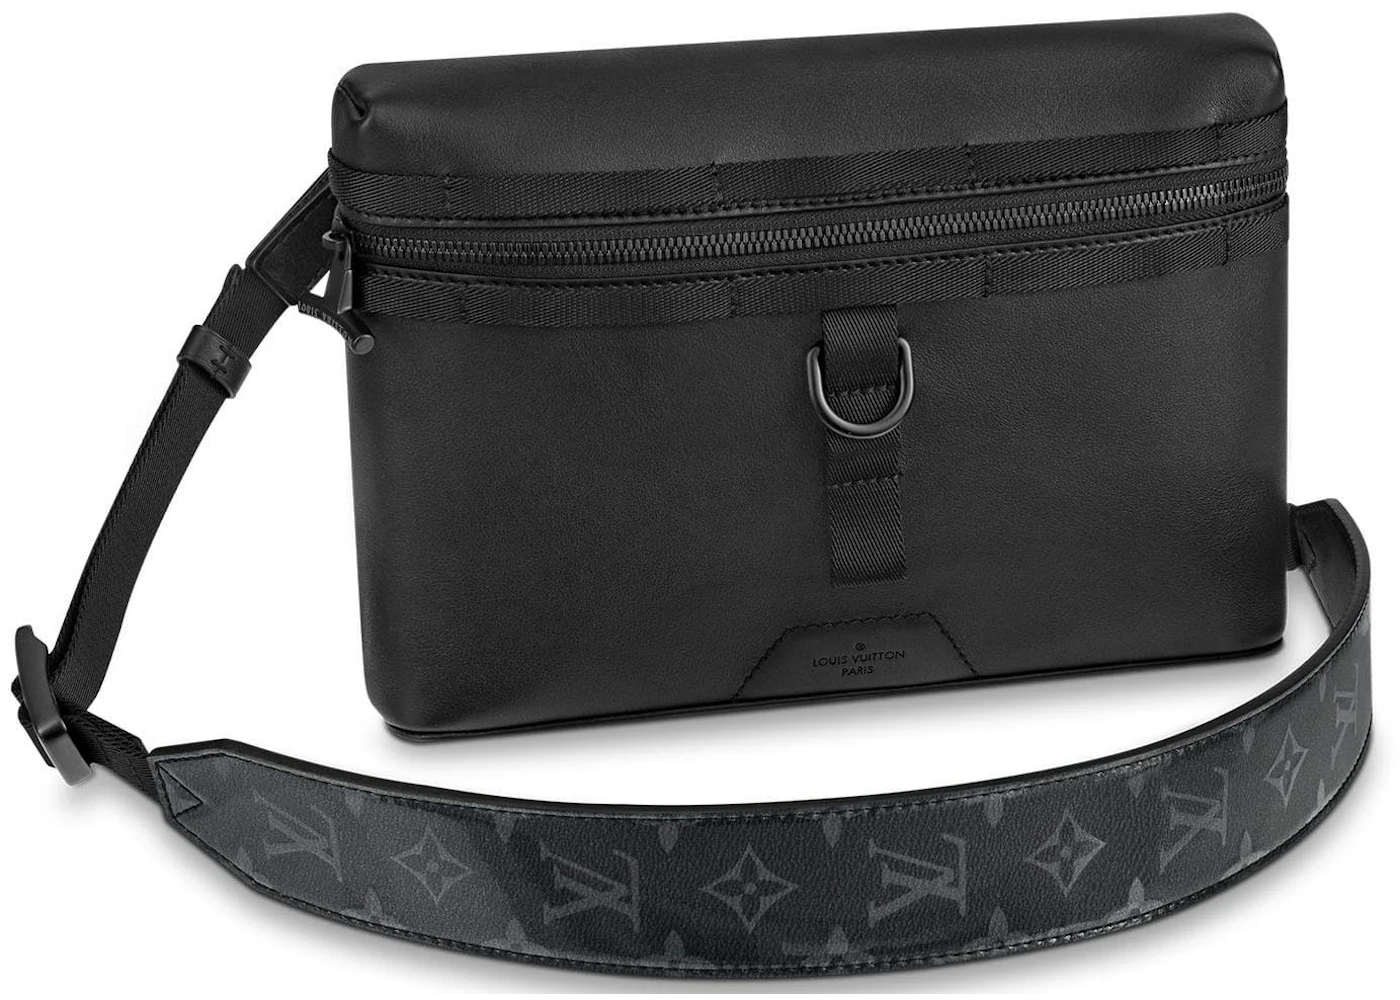 Louis Vuitton Messenger PM Dark Infinity in Calfskin Leather with Black ...